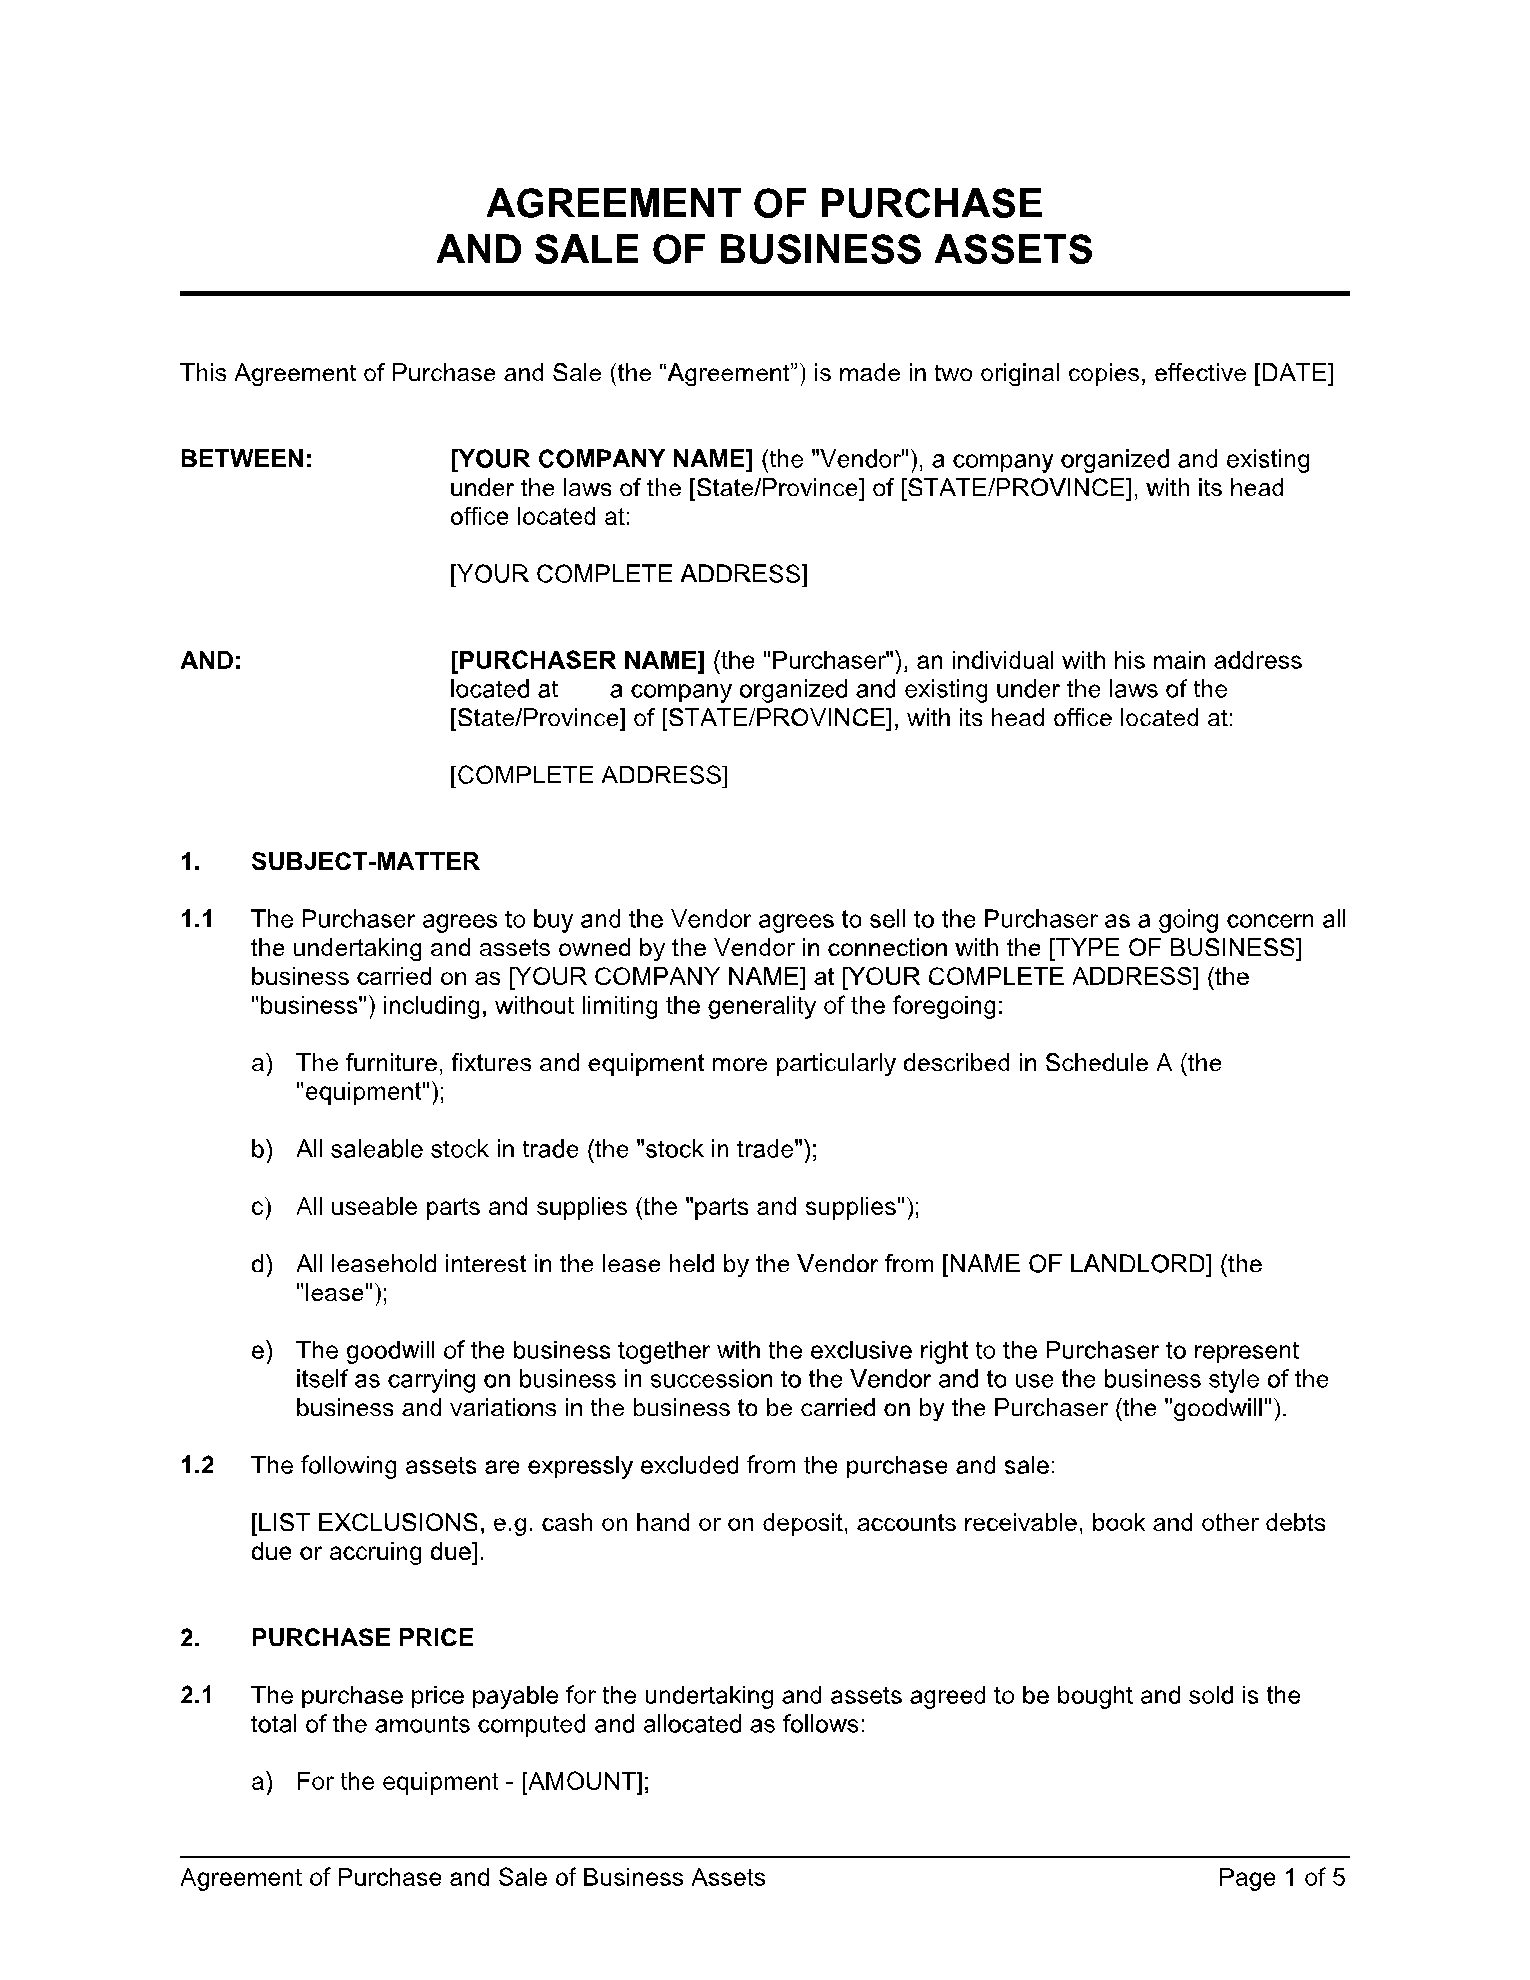 Business Sale Agreement